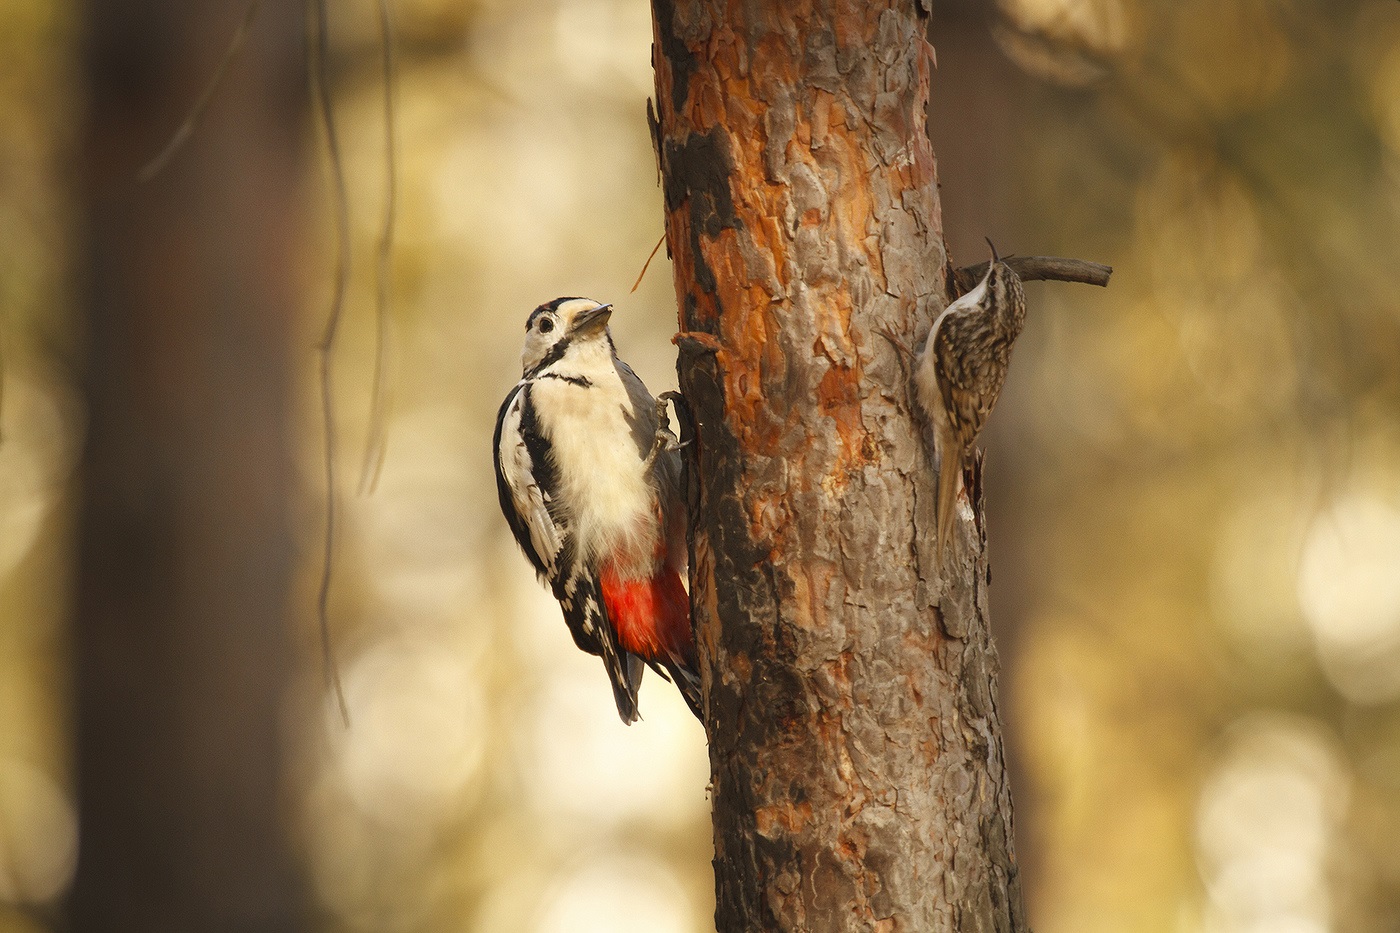 Pike and woodpecker on a tree trunk